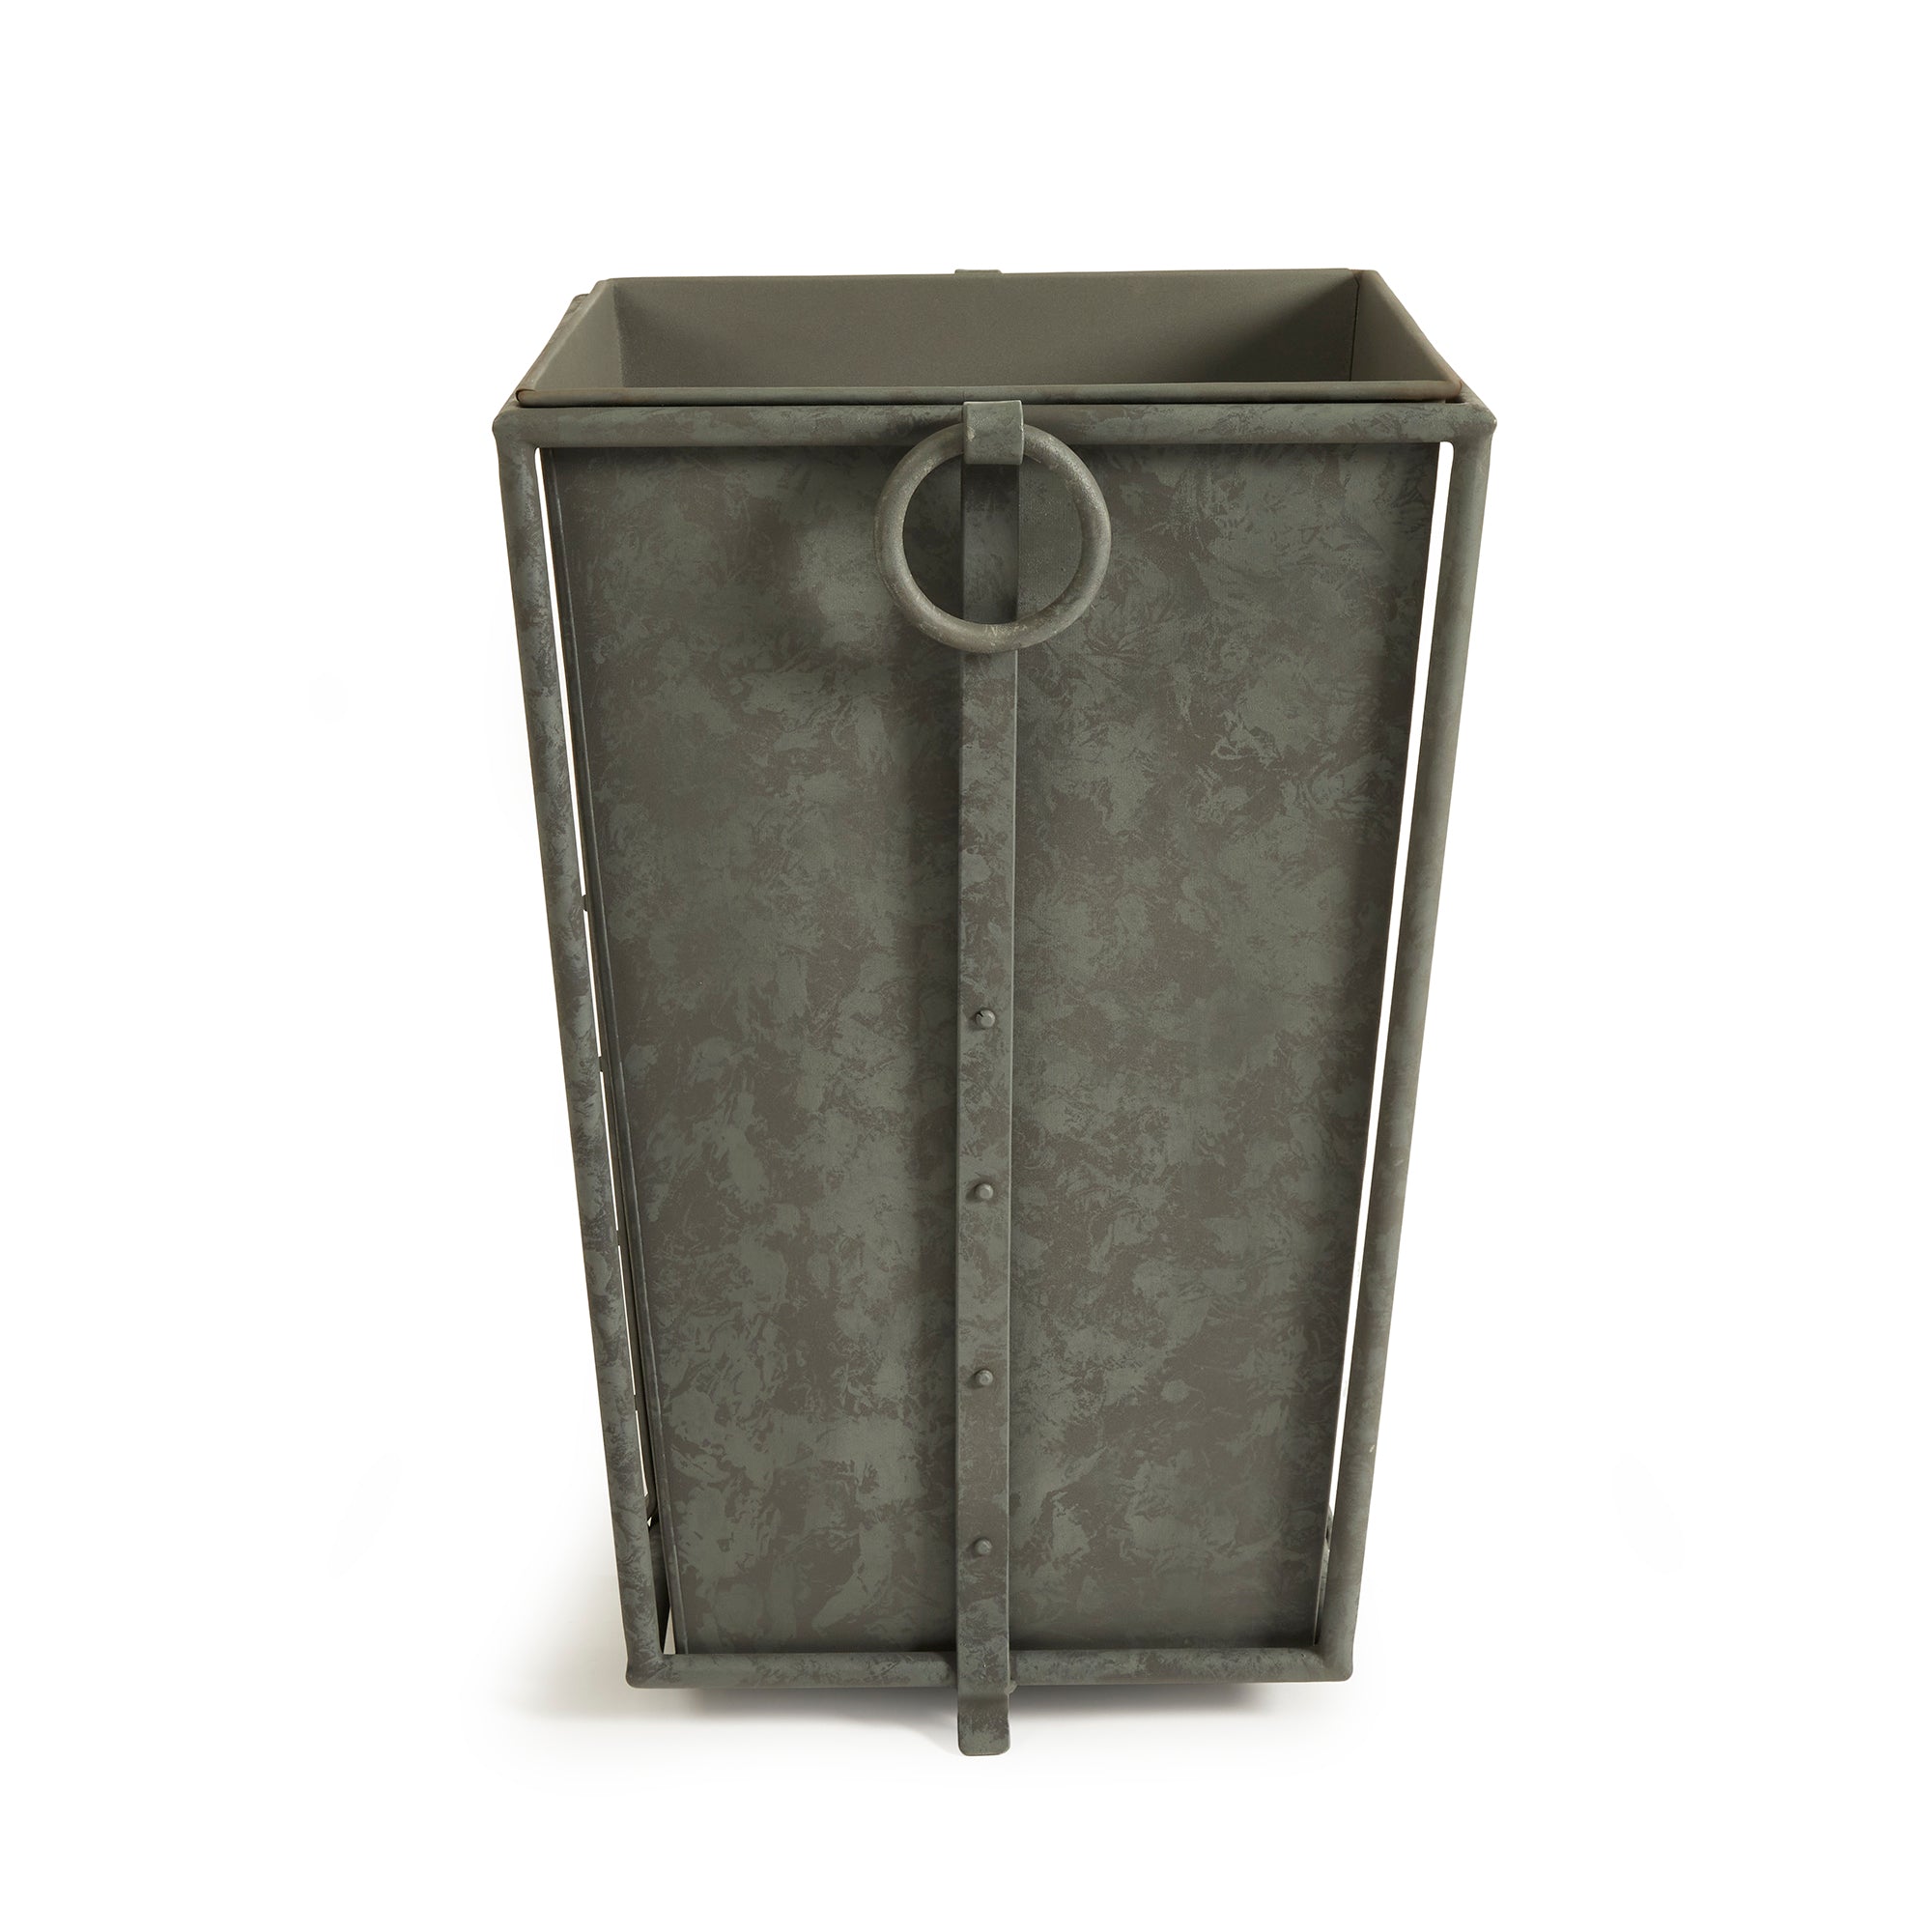 With metal liners that easily slide out, the Callahan Tapered Planter is as practical as it is handsome. The rounded handles and traditional design make it an outdoor classic. Amethyst Home provides interior design, new construction, custom furniture, and area rugs in the Kansas City metro area.